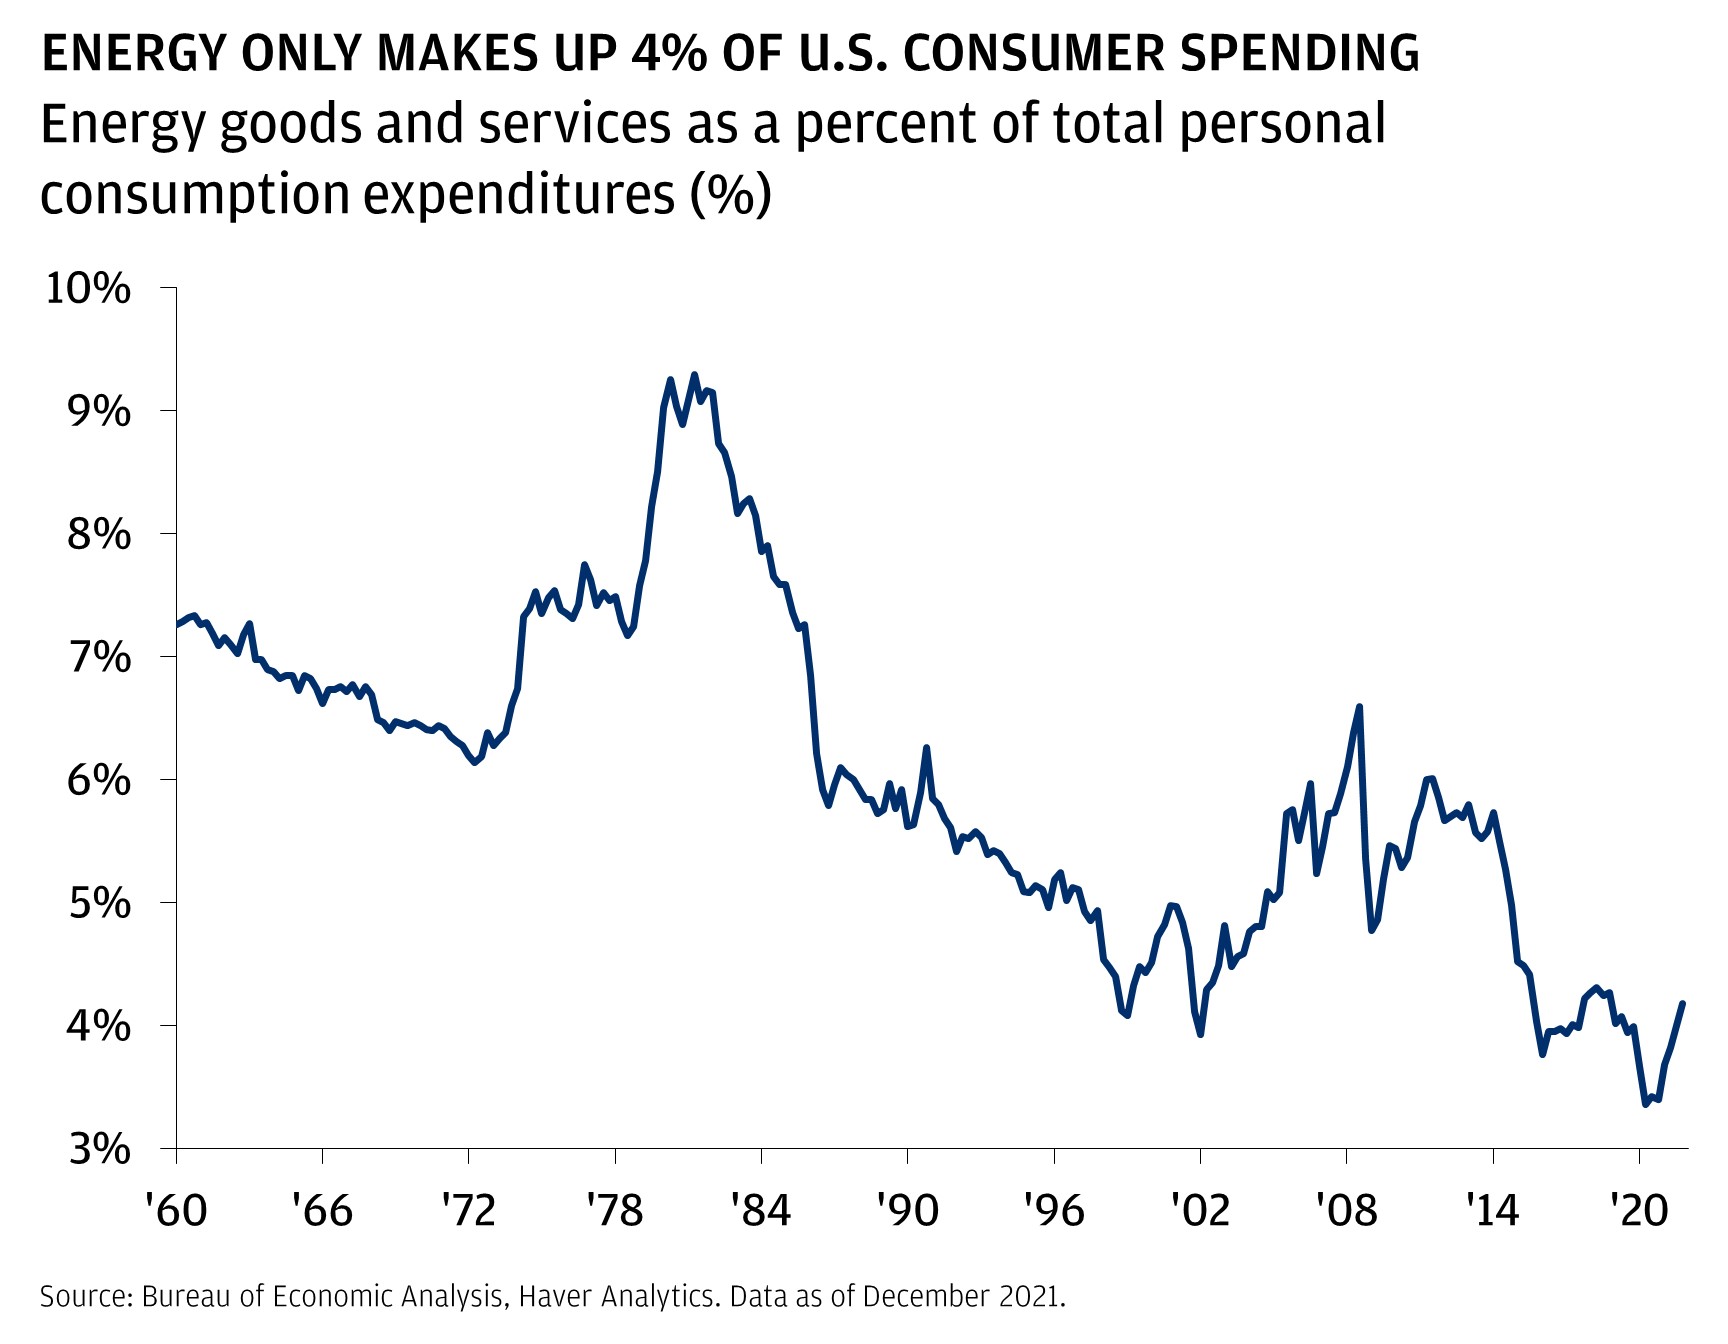 This chart shows the energy goods and services as a percentage of total personal consumption expenditures from 1960 to 2020. ENERGY ONLY MAKES UP 4% OF U.S. CONSUMER SPENDING